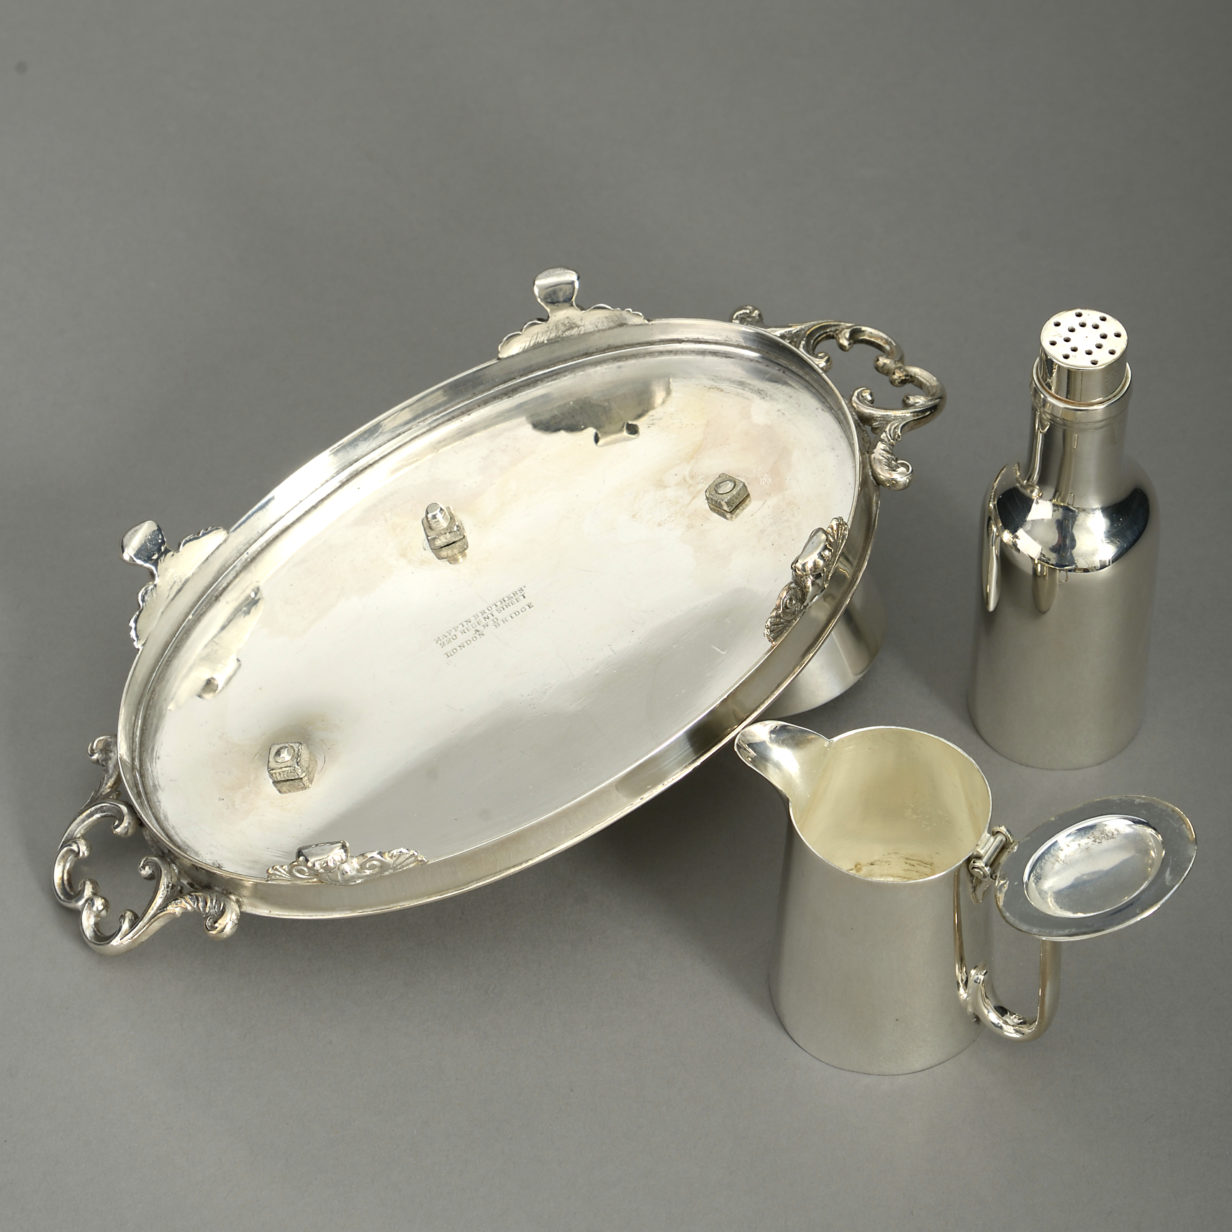 Mappin and webb condiments set